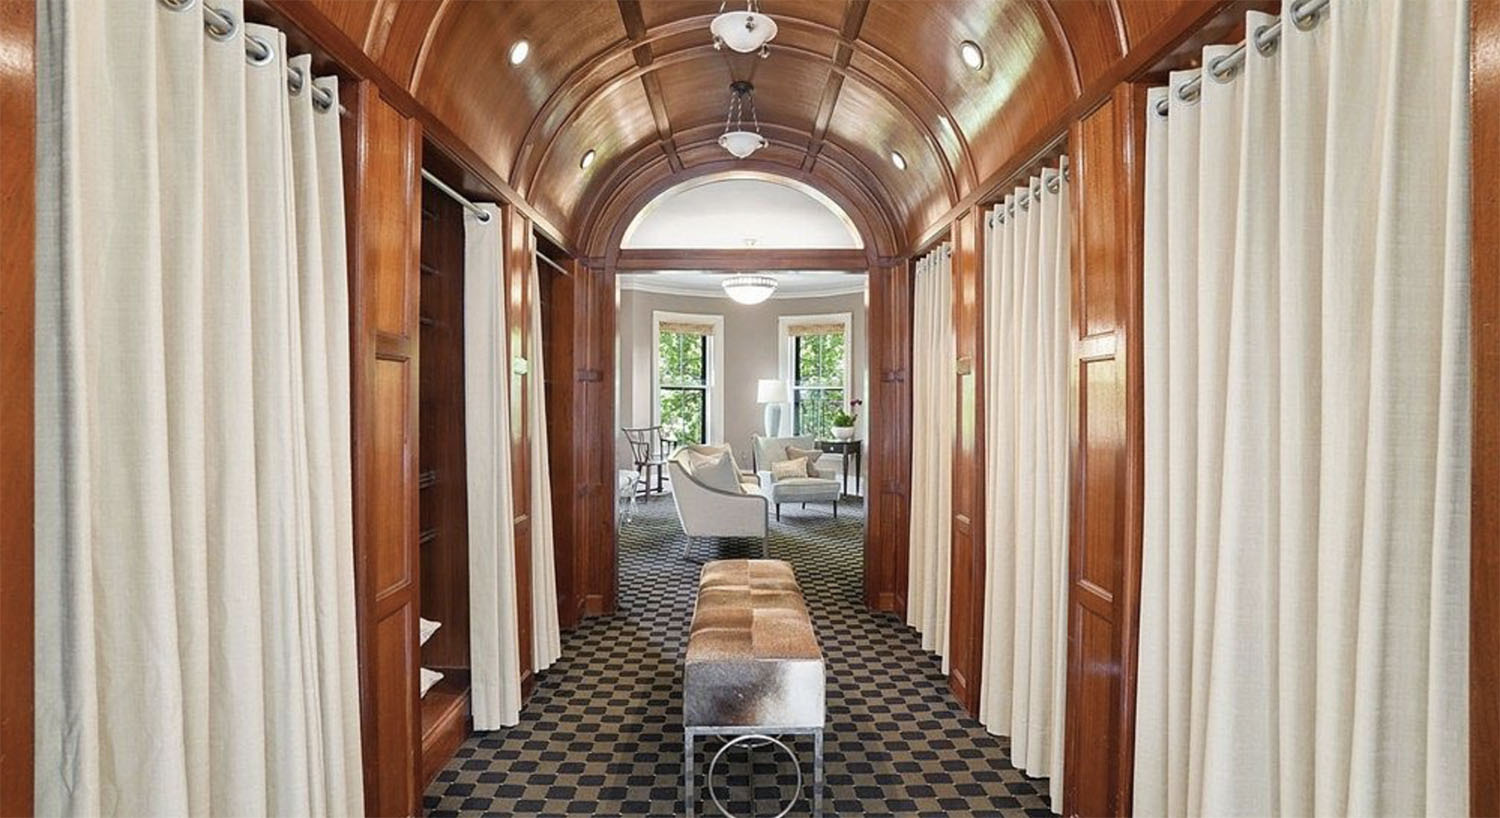 Space with mahogany barrel vaulted ceiling, off white fabric curtains, black and brown carpet, with view of large soaking tub in bathroom